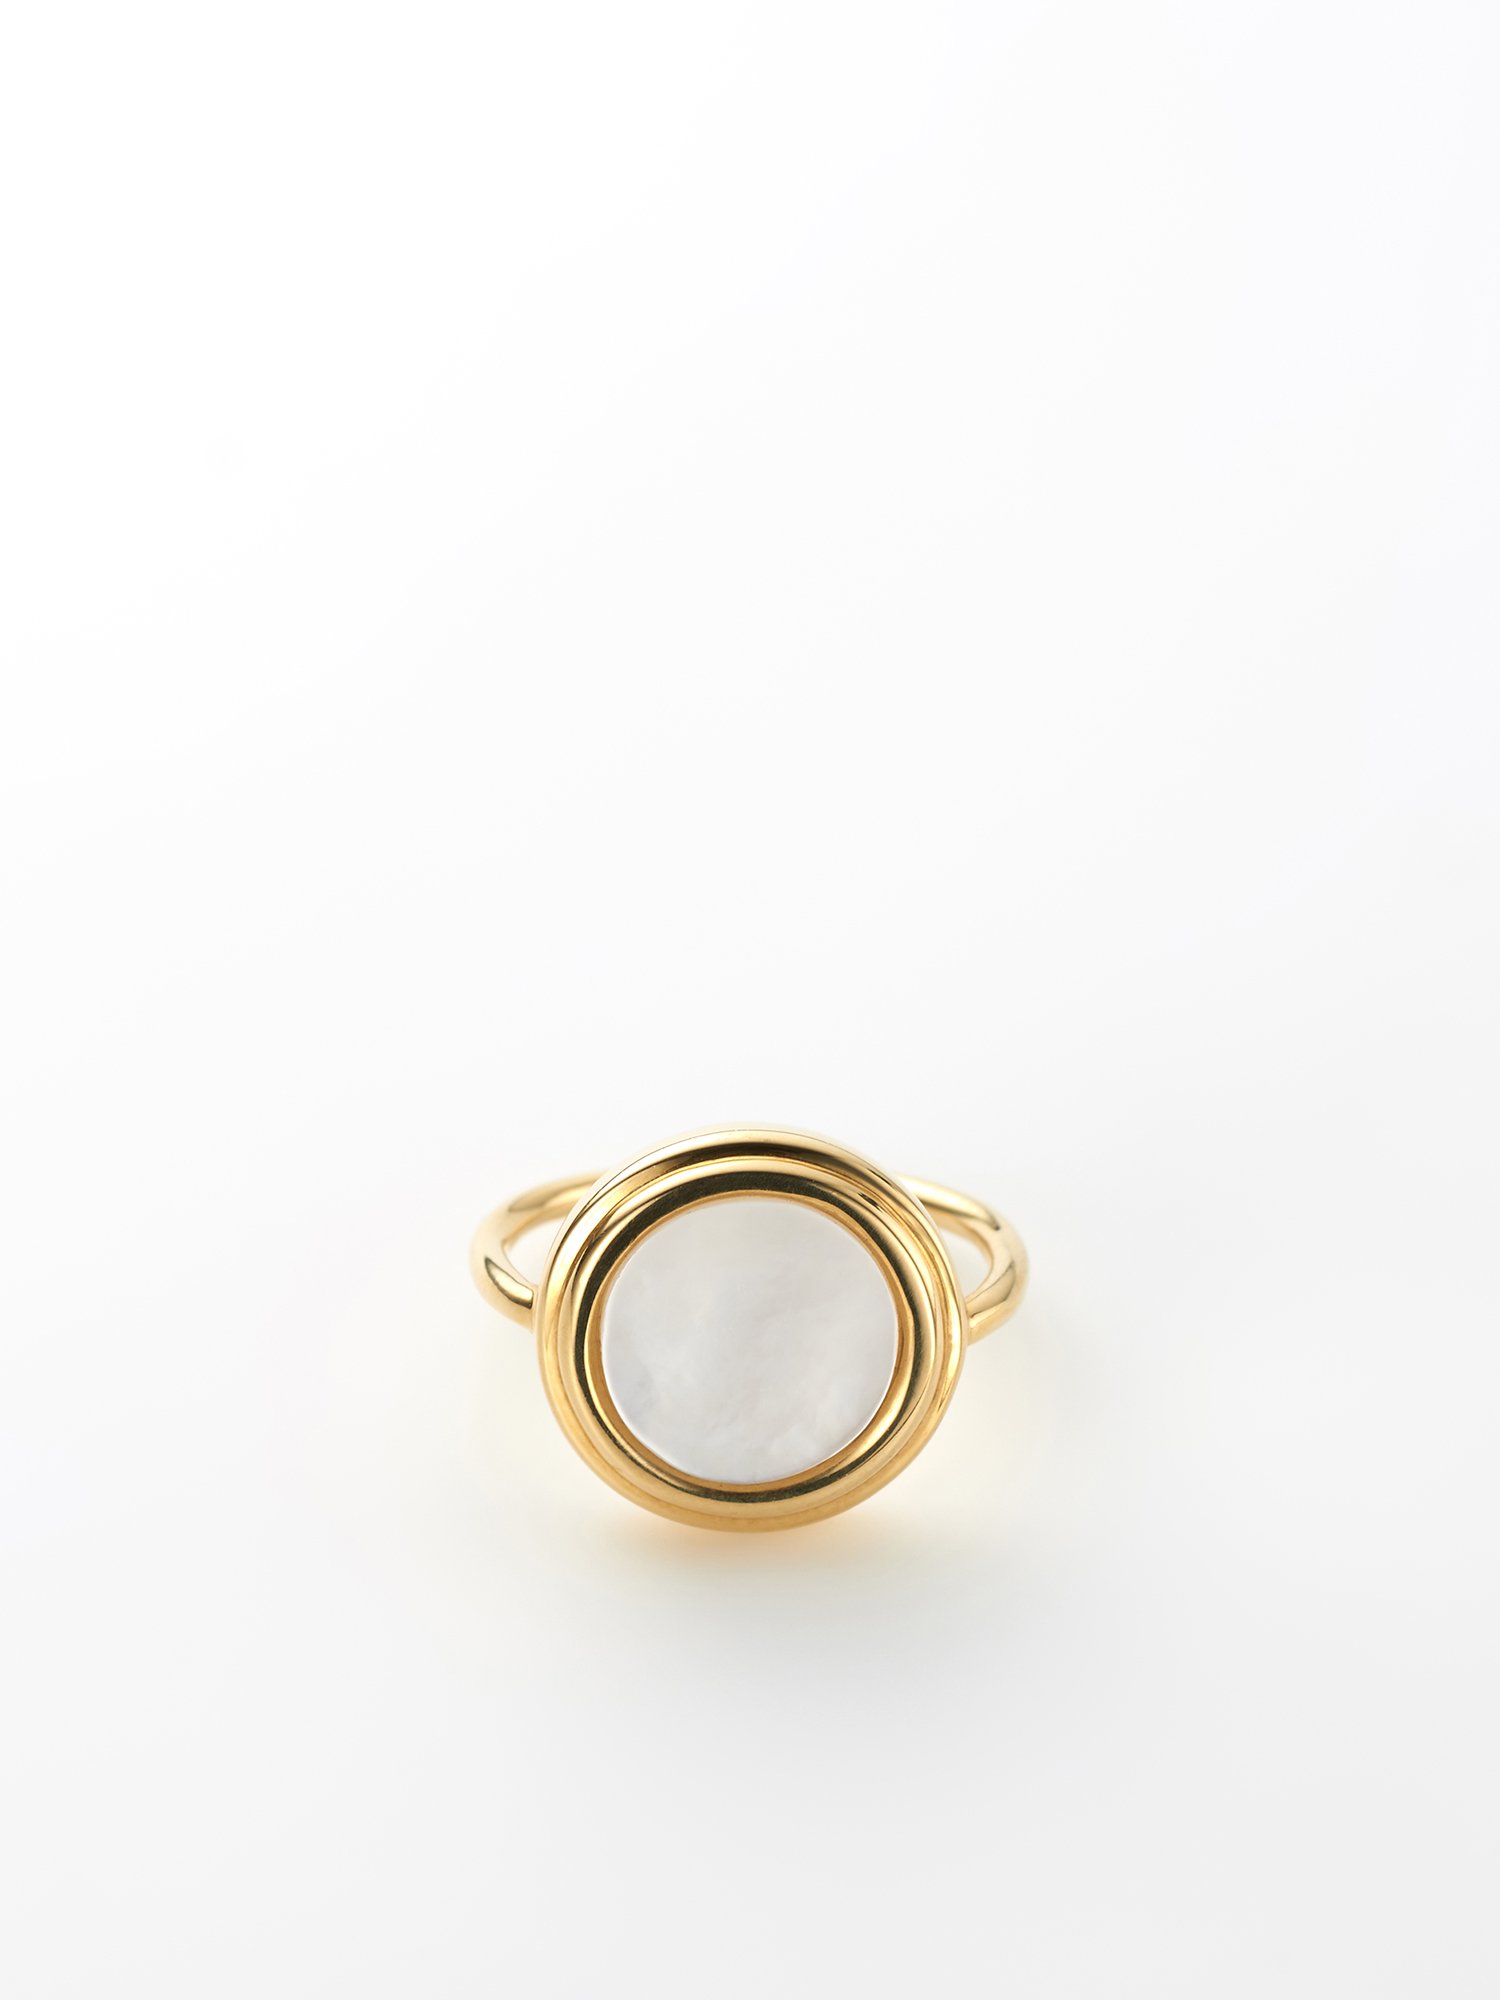  SOPHISTICATED VINTAGE / Planet ring / Mother of pearl